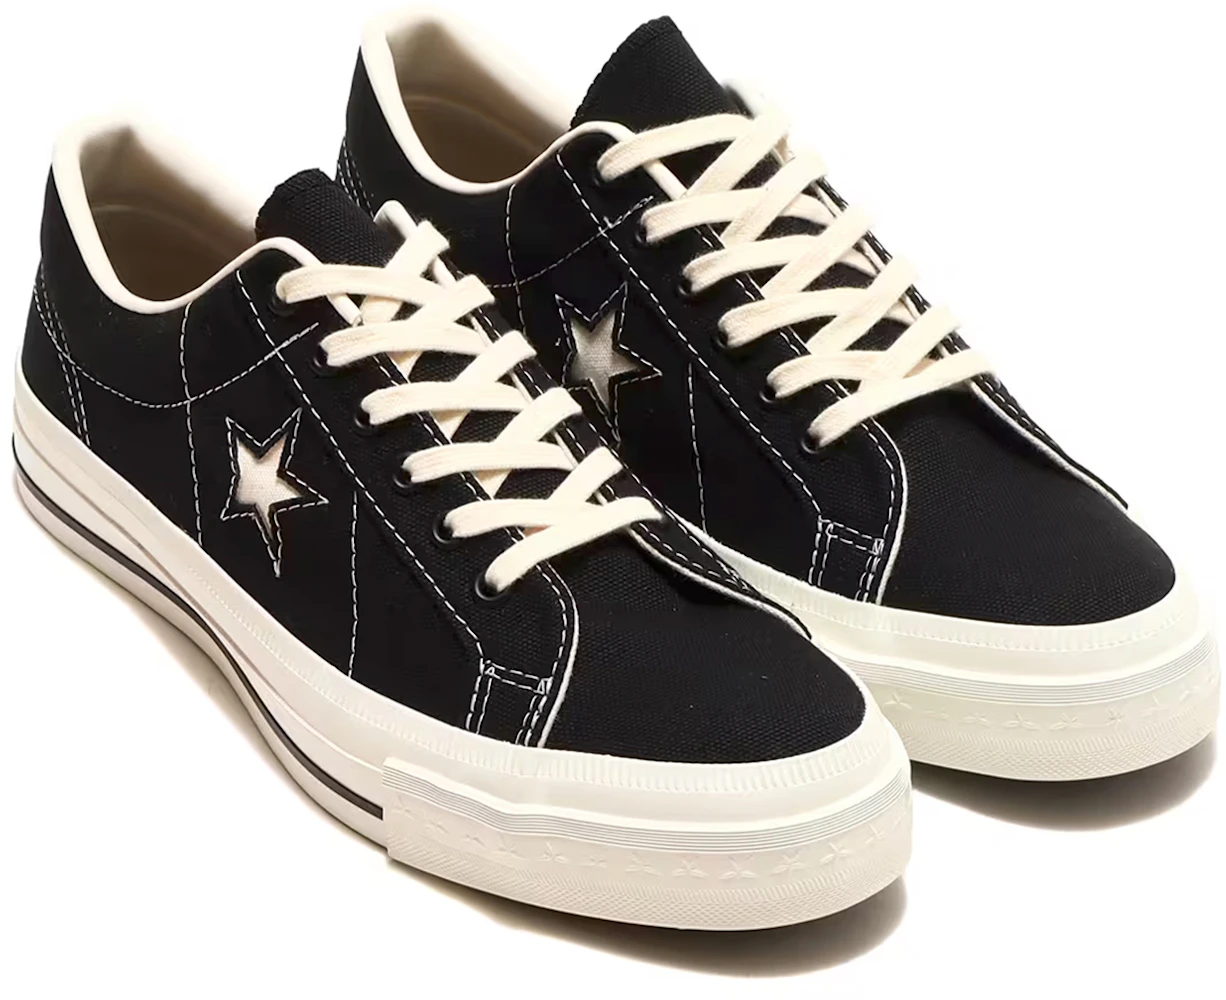 Converse One Star Made in Japan Vintage Canvas Black Men's - 35200520 - US